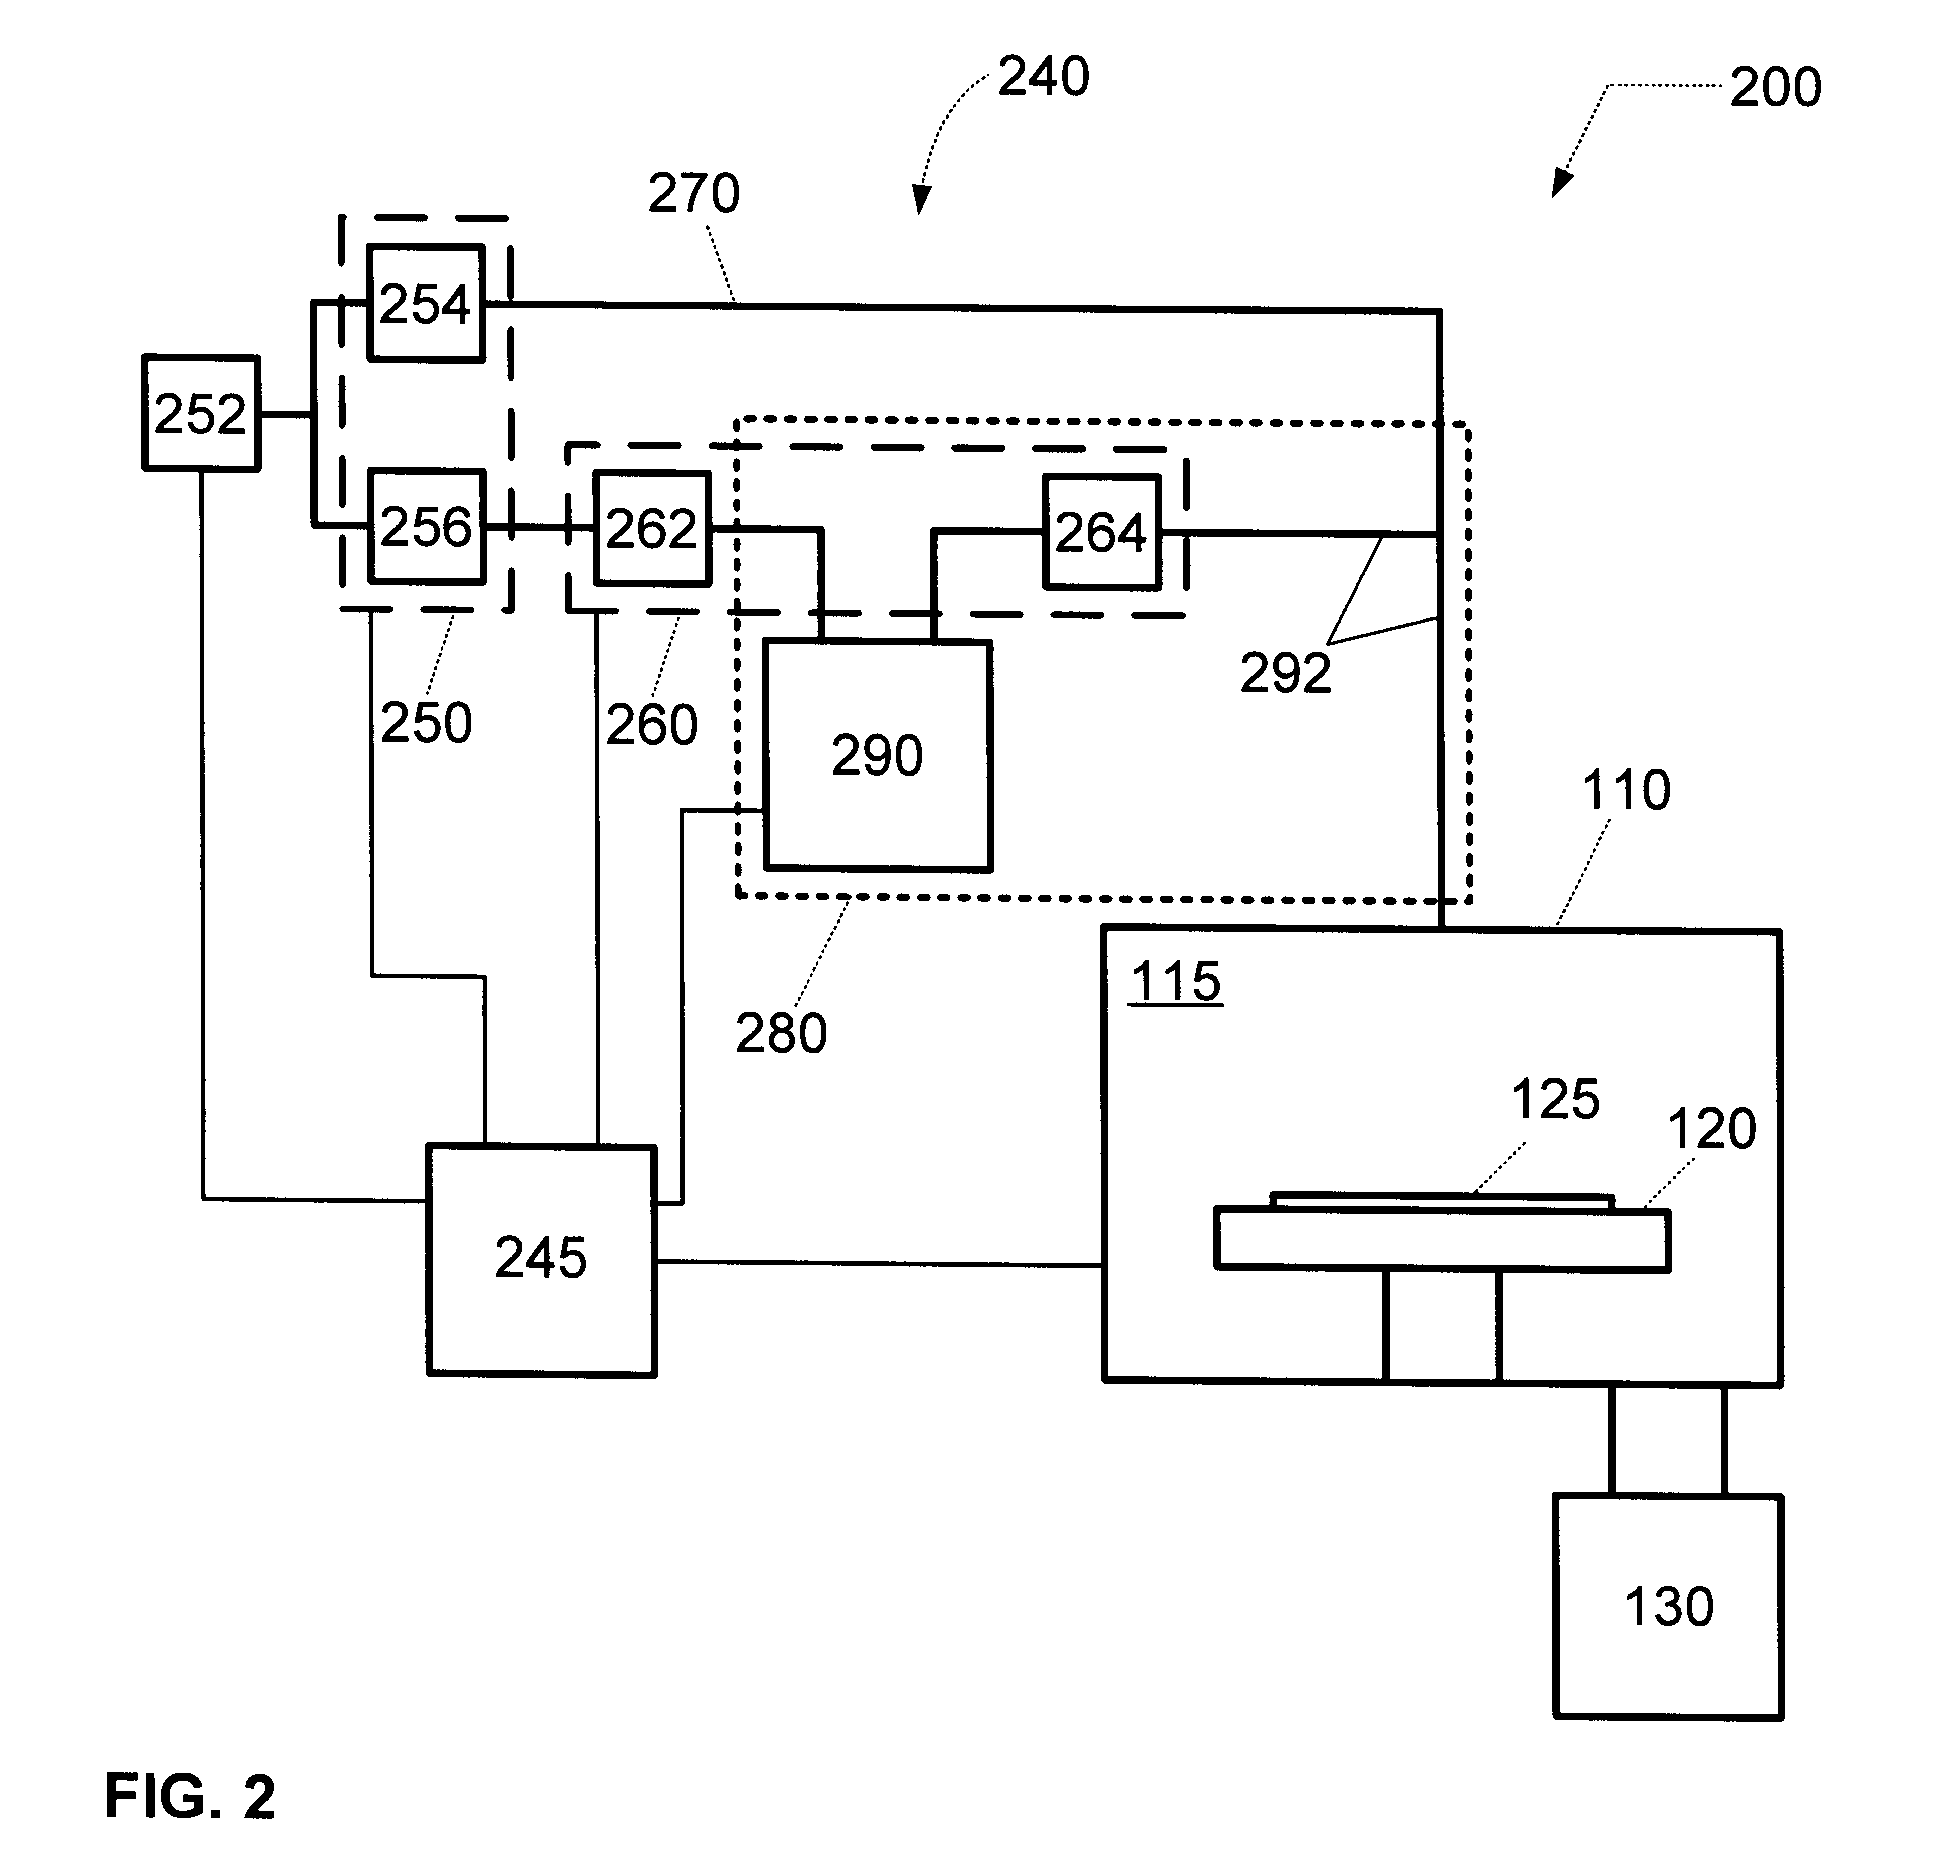 Method and system for controlling a vapor delivery system